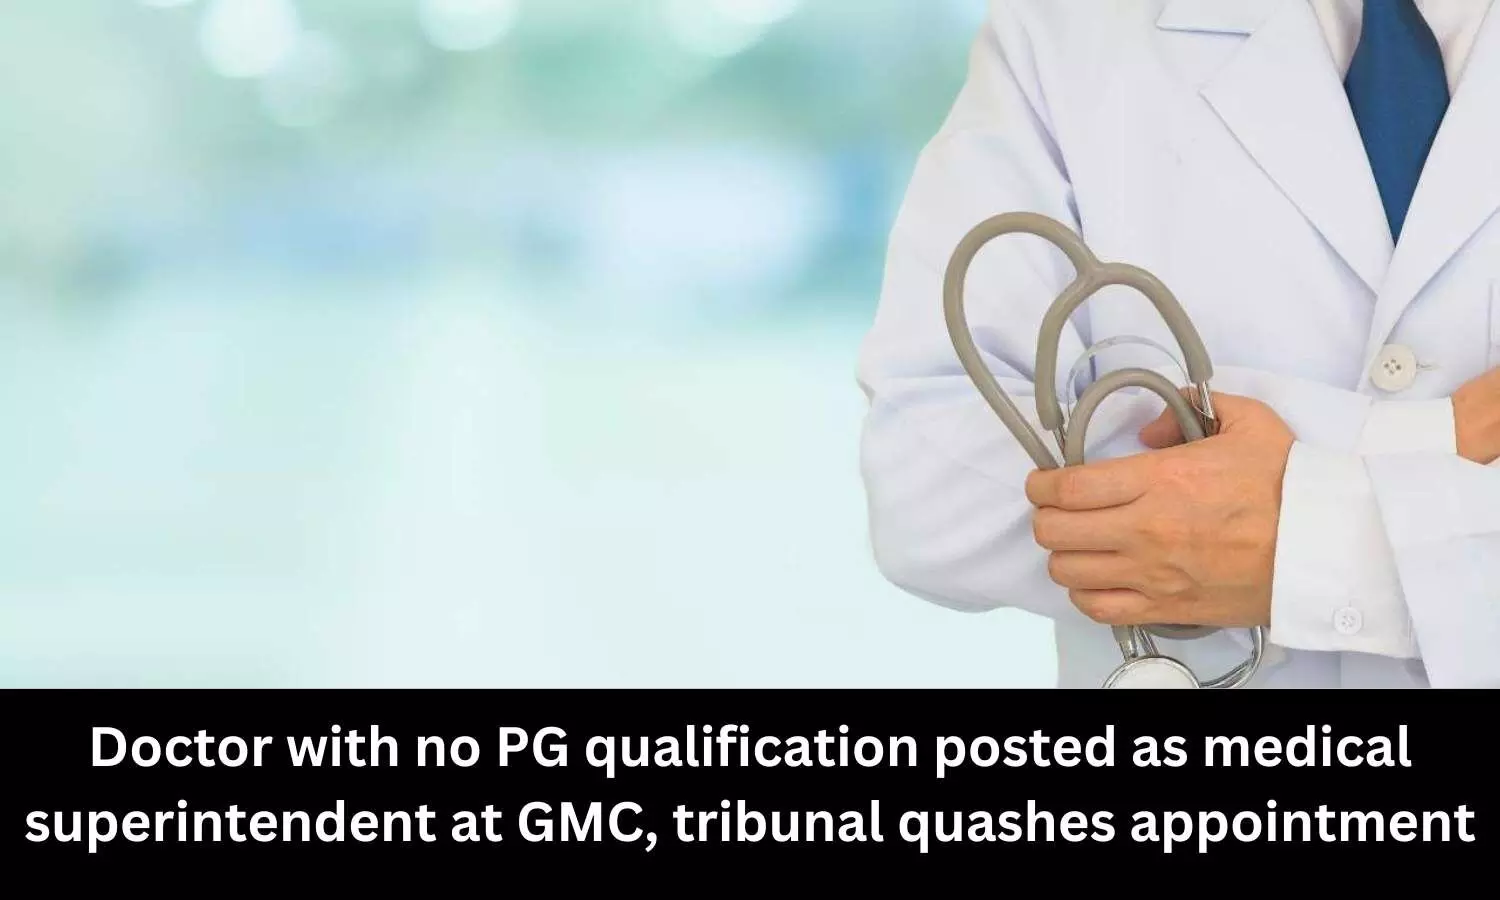 Doctor with no PG qualification posted as medical superintendent at GMC, tribunal quashes appointment